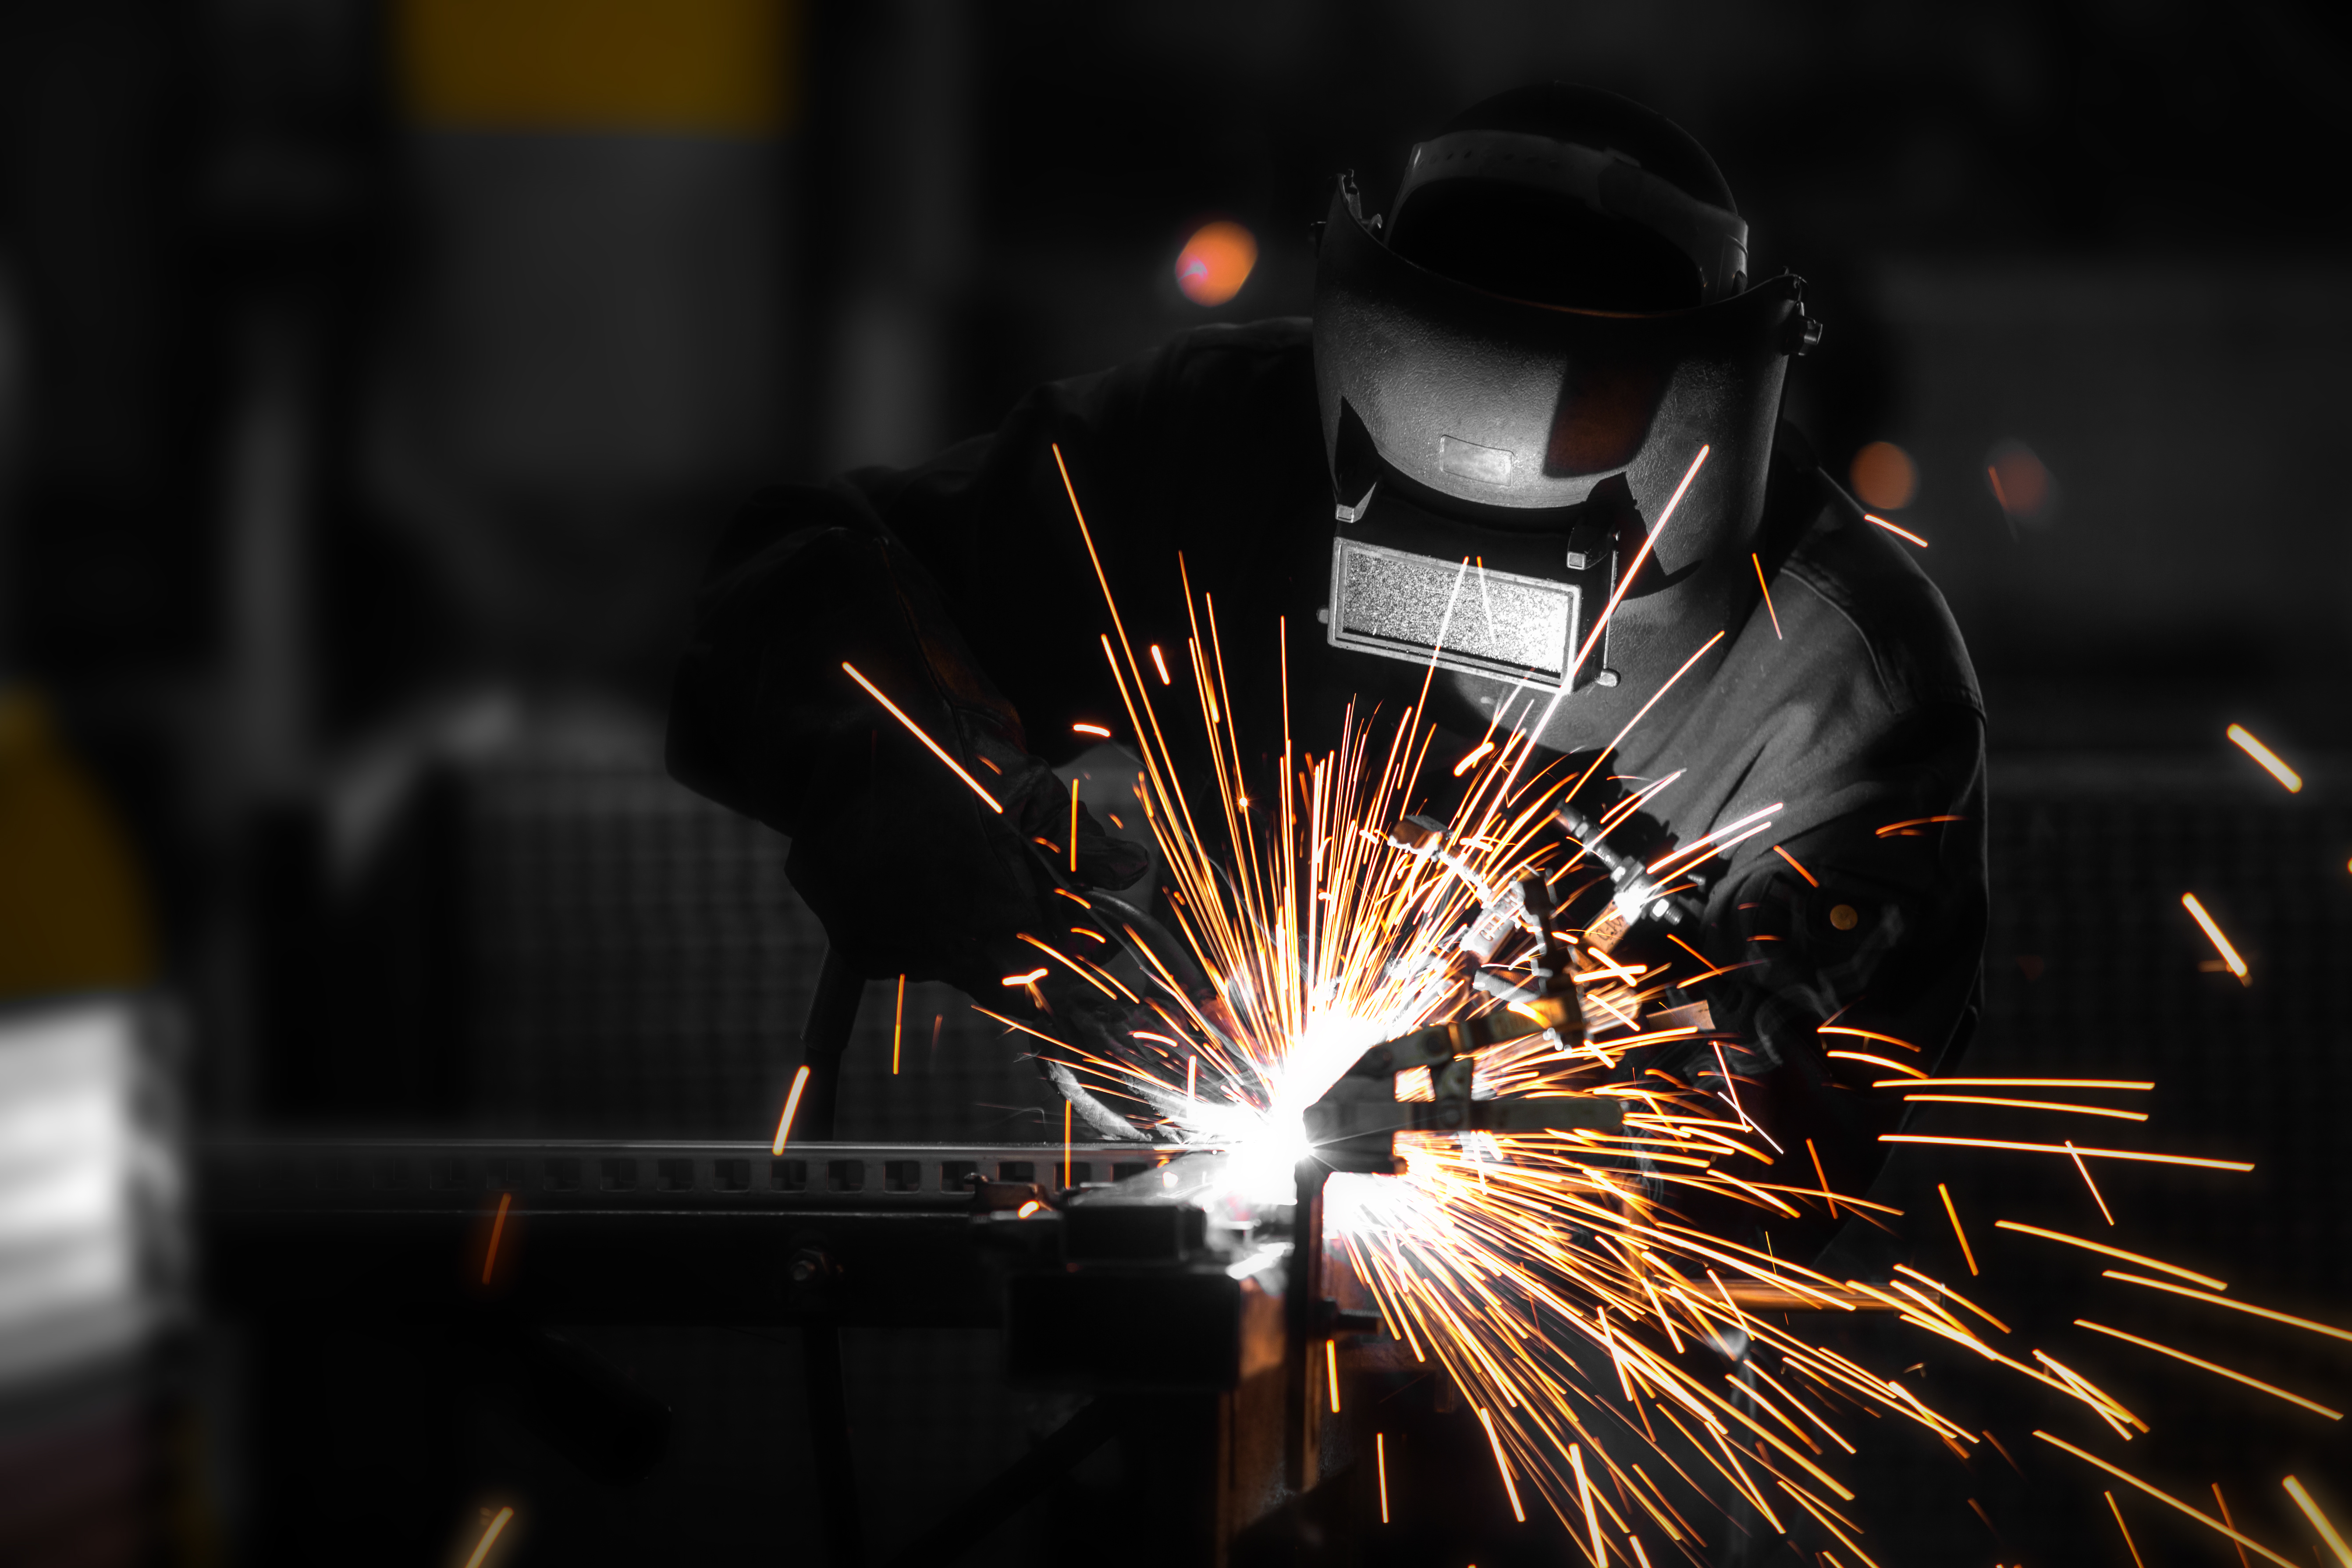 A welder is cutting through steel, set in a dark backgound with bright sparks flying.